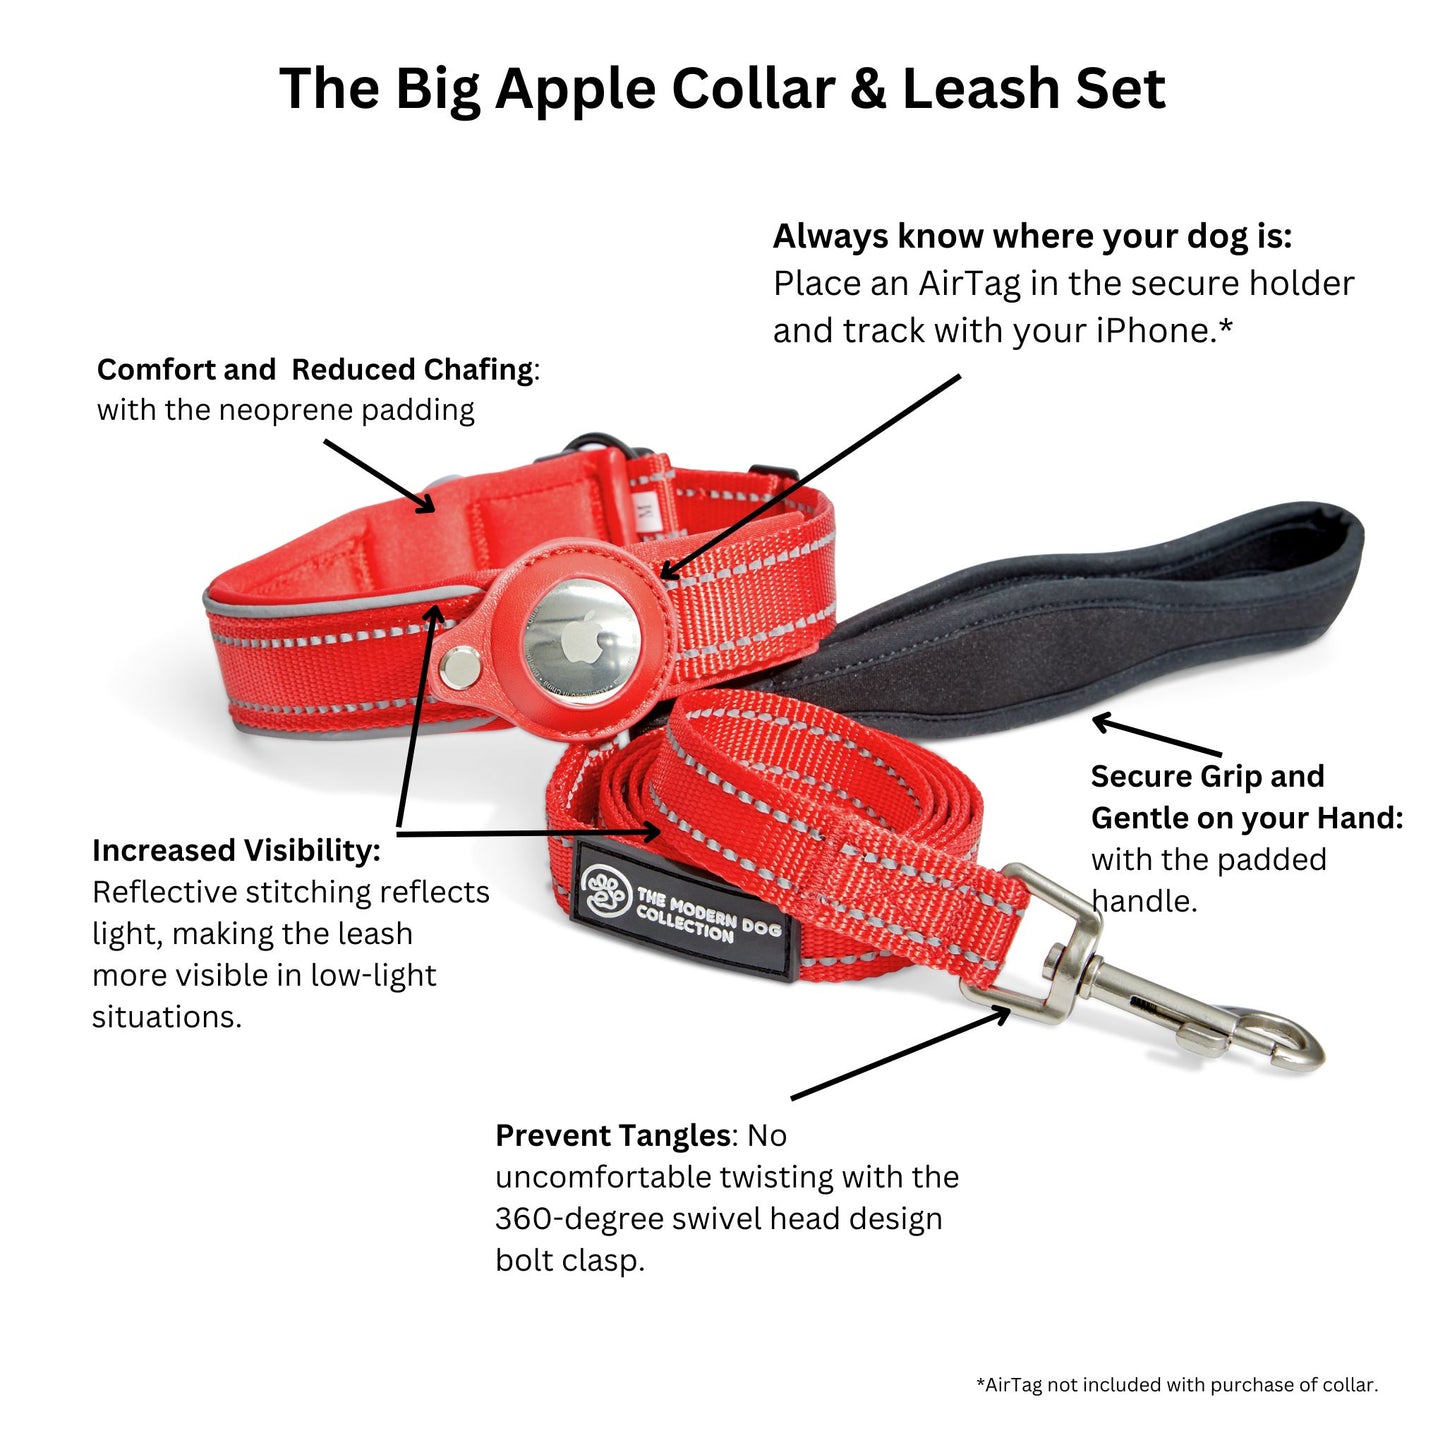 The Big Apple Airtag Collar and Leash Set.  Always know where your dog is.  Comfort and reduced chafing.  Increased visibility. Prevent tangles.  Secure grip and gentle on your hand.